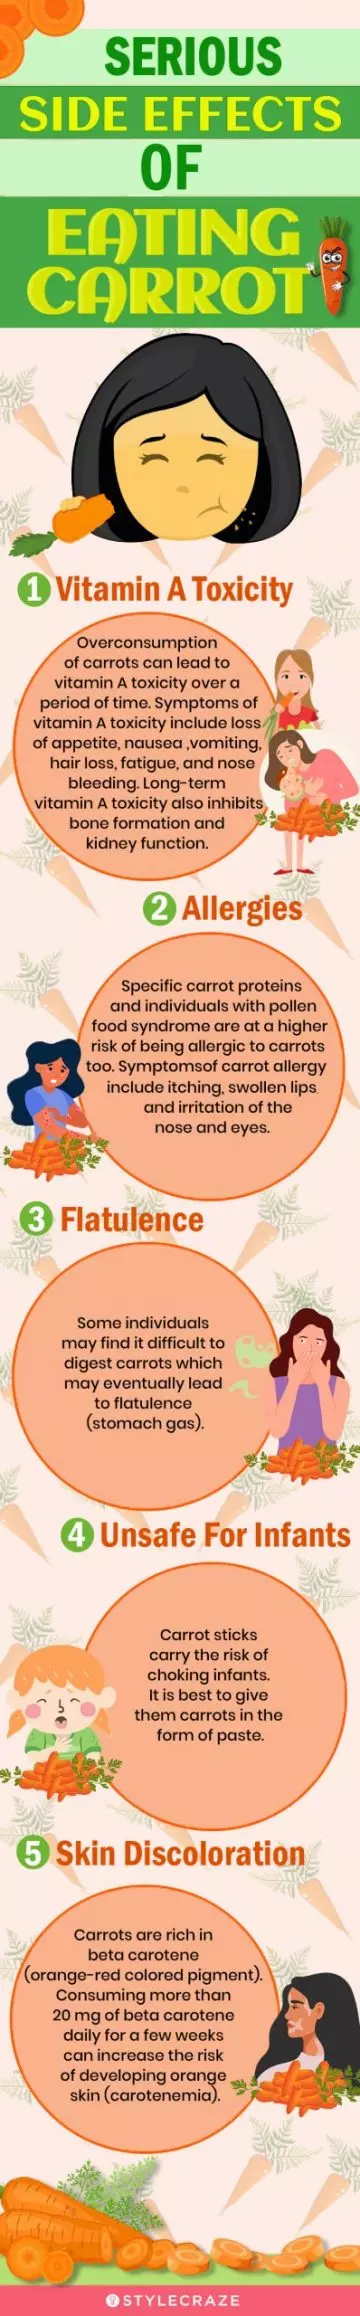 serious side effects of eating carrot (infographic)